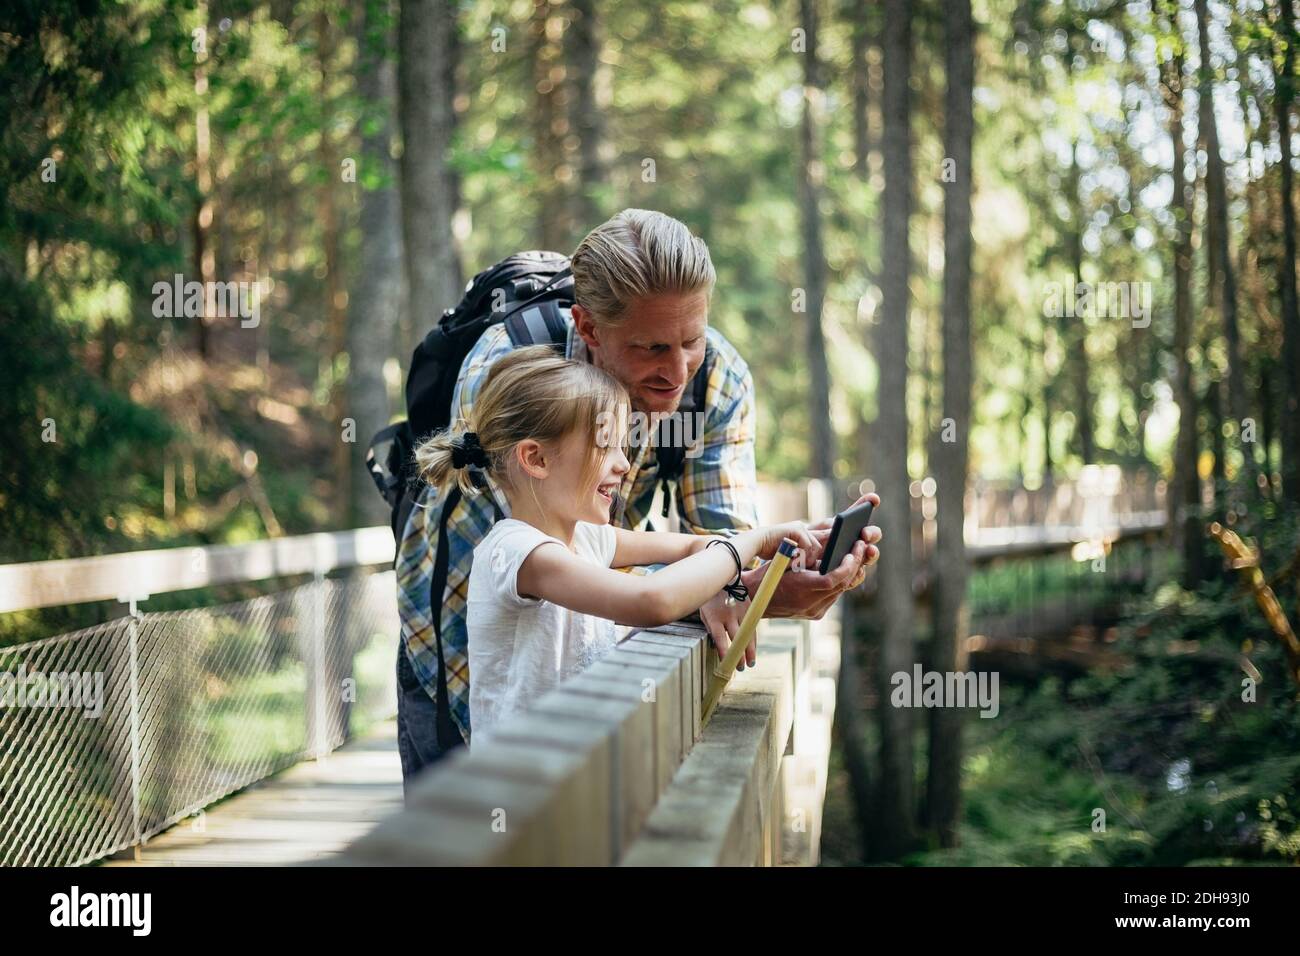 Smiling father with backpack and daughter looking at smart phone in forest Stock Photo